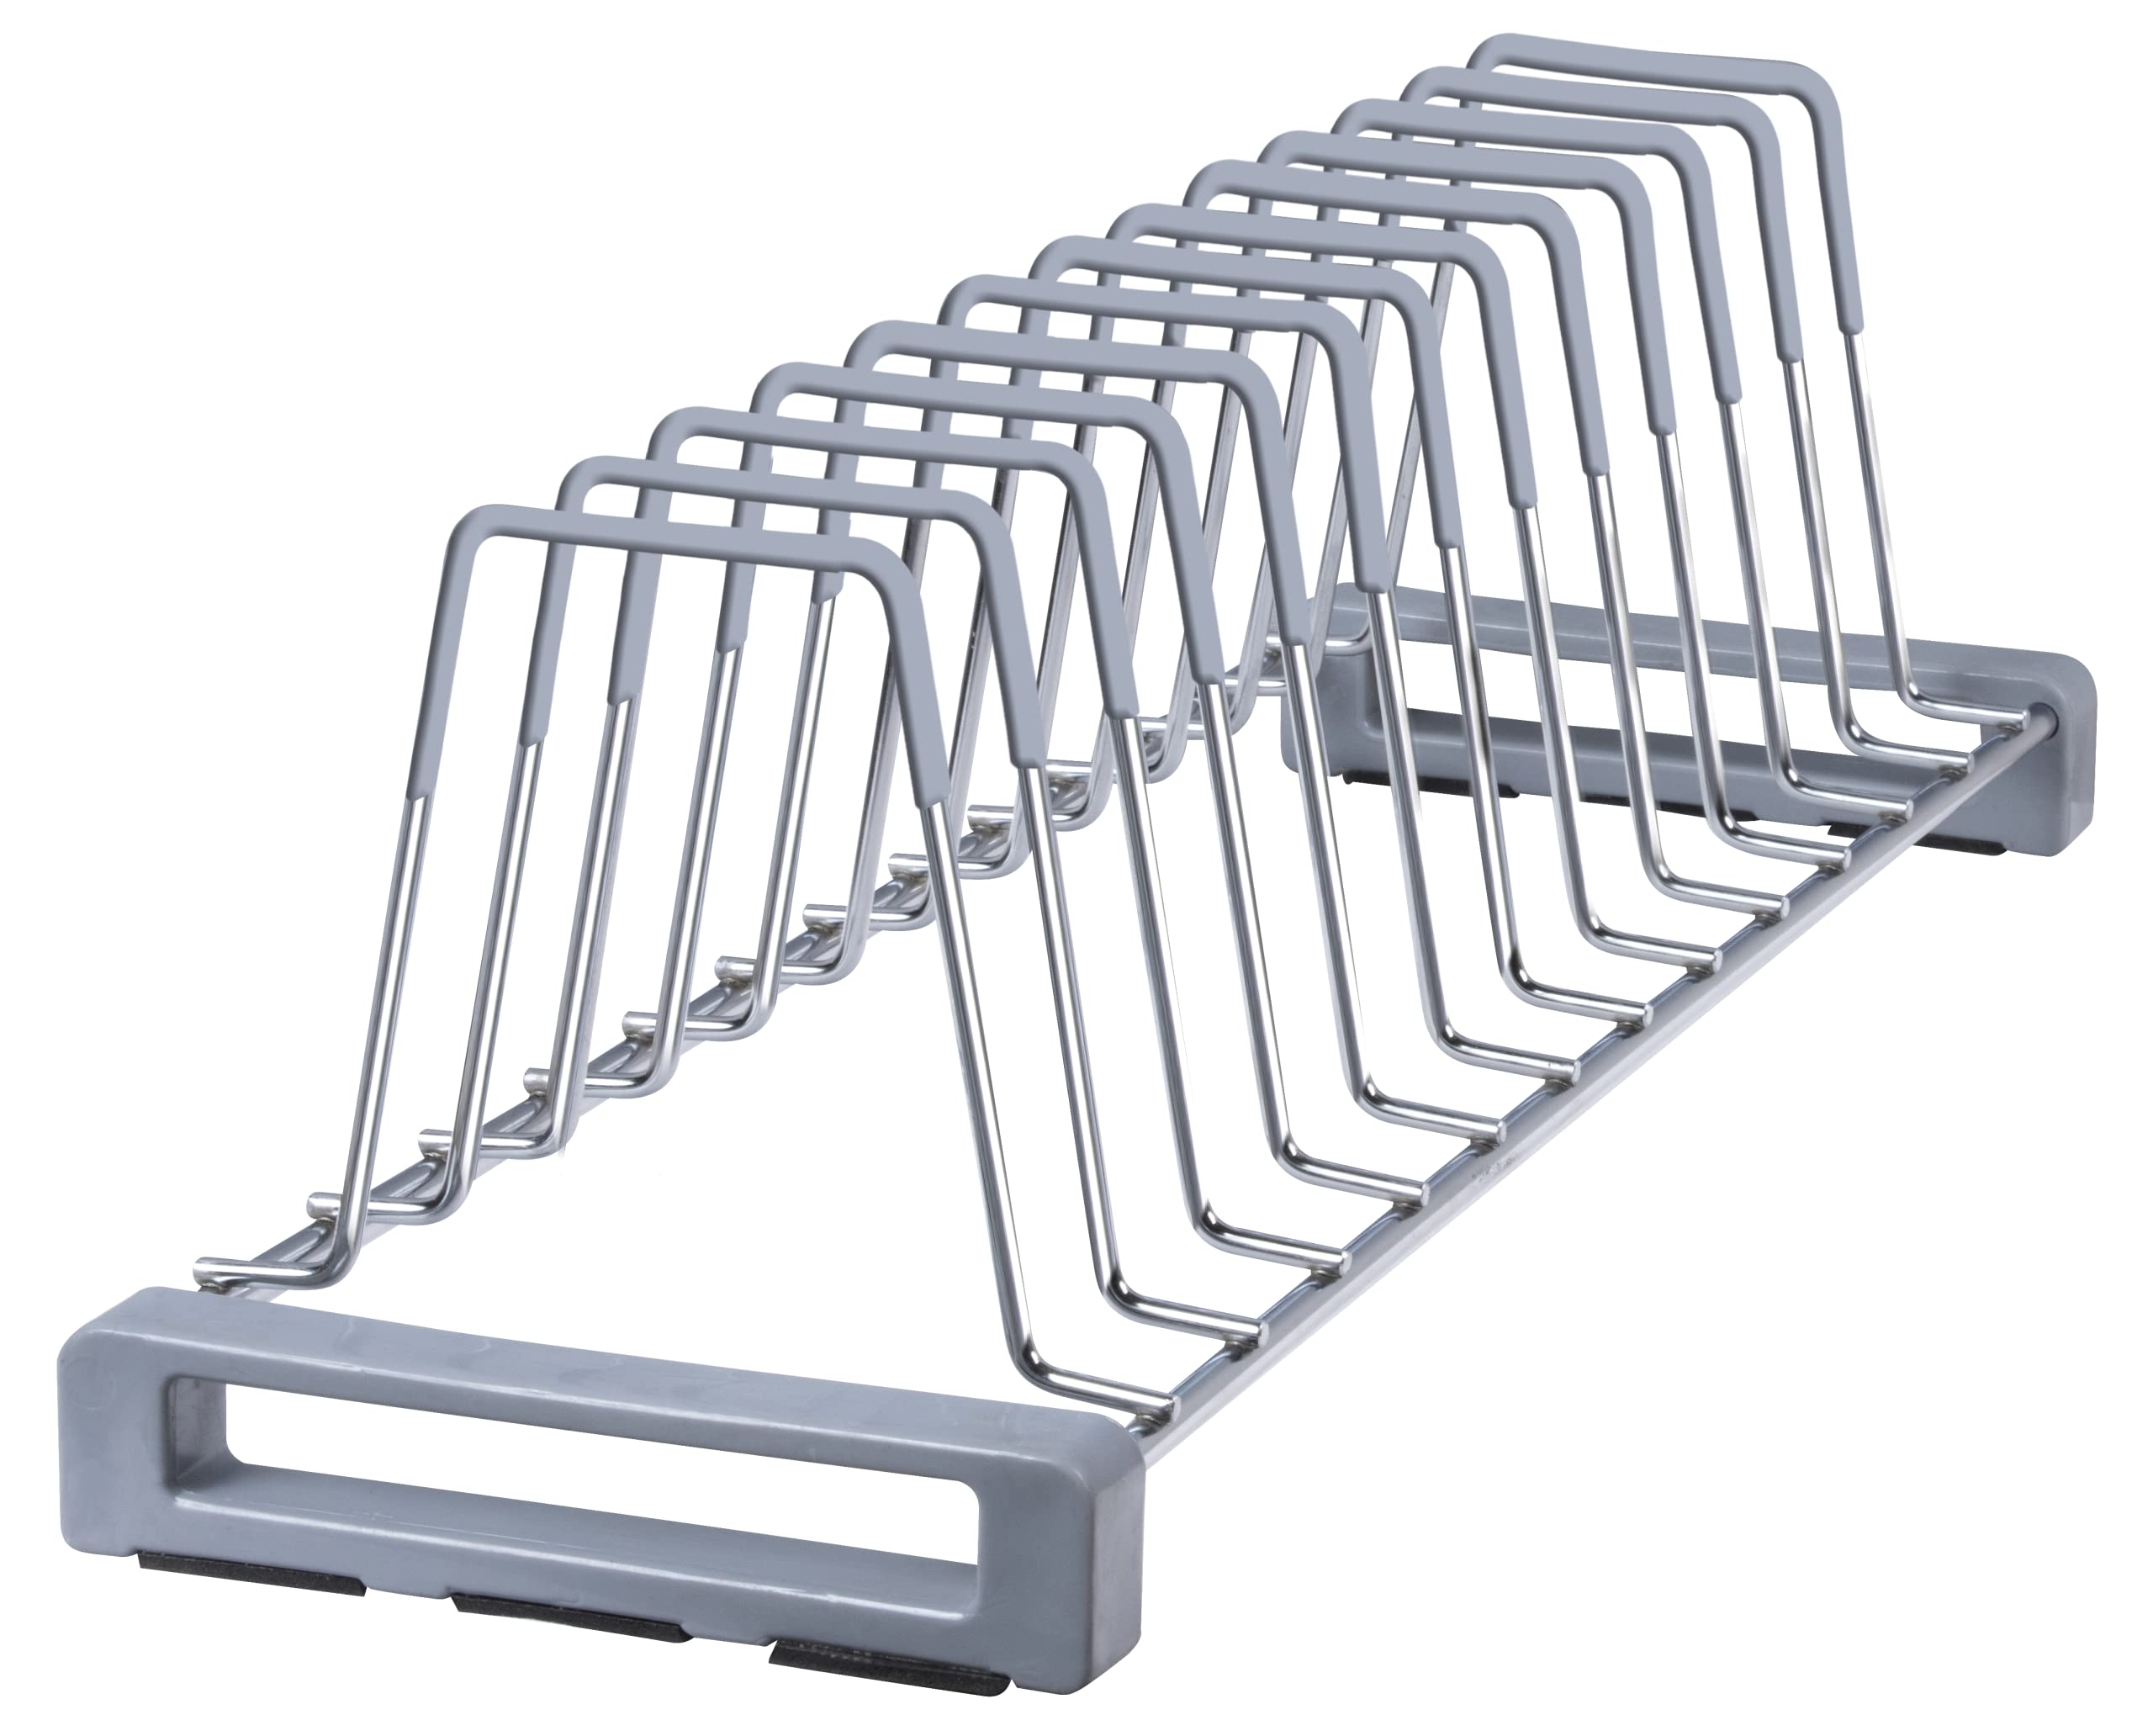 Plantex Deluxe Stainless Steel Plate Rack/Dish Rack/Thali Stand/Dish Stand/Utensil Rack (Chrome)